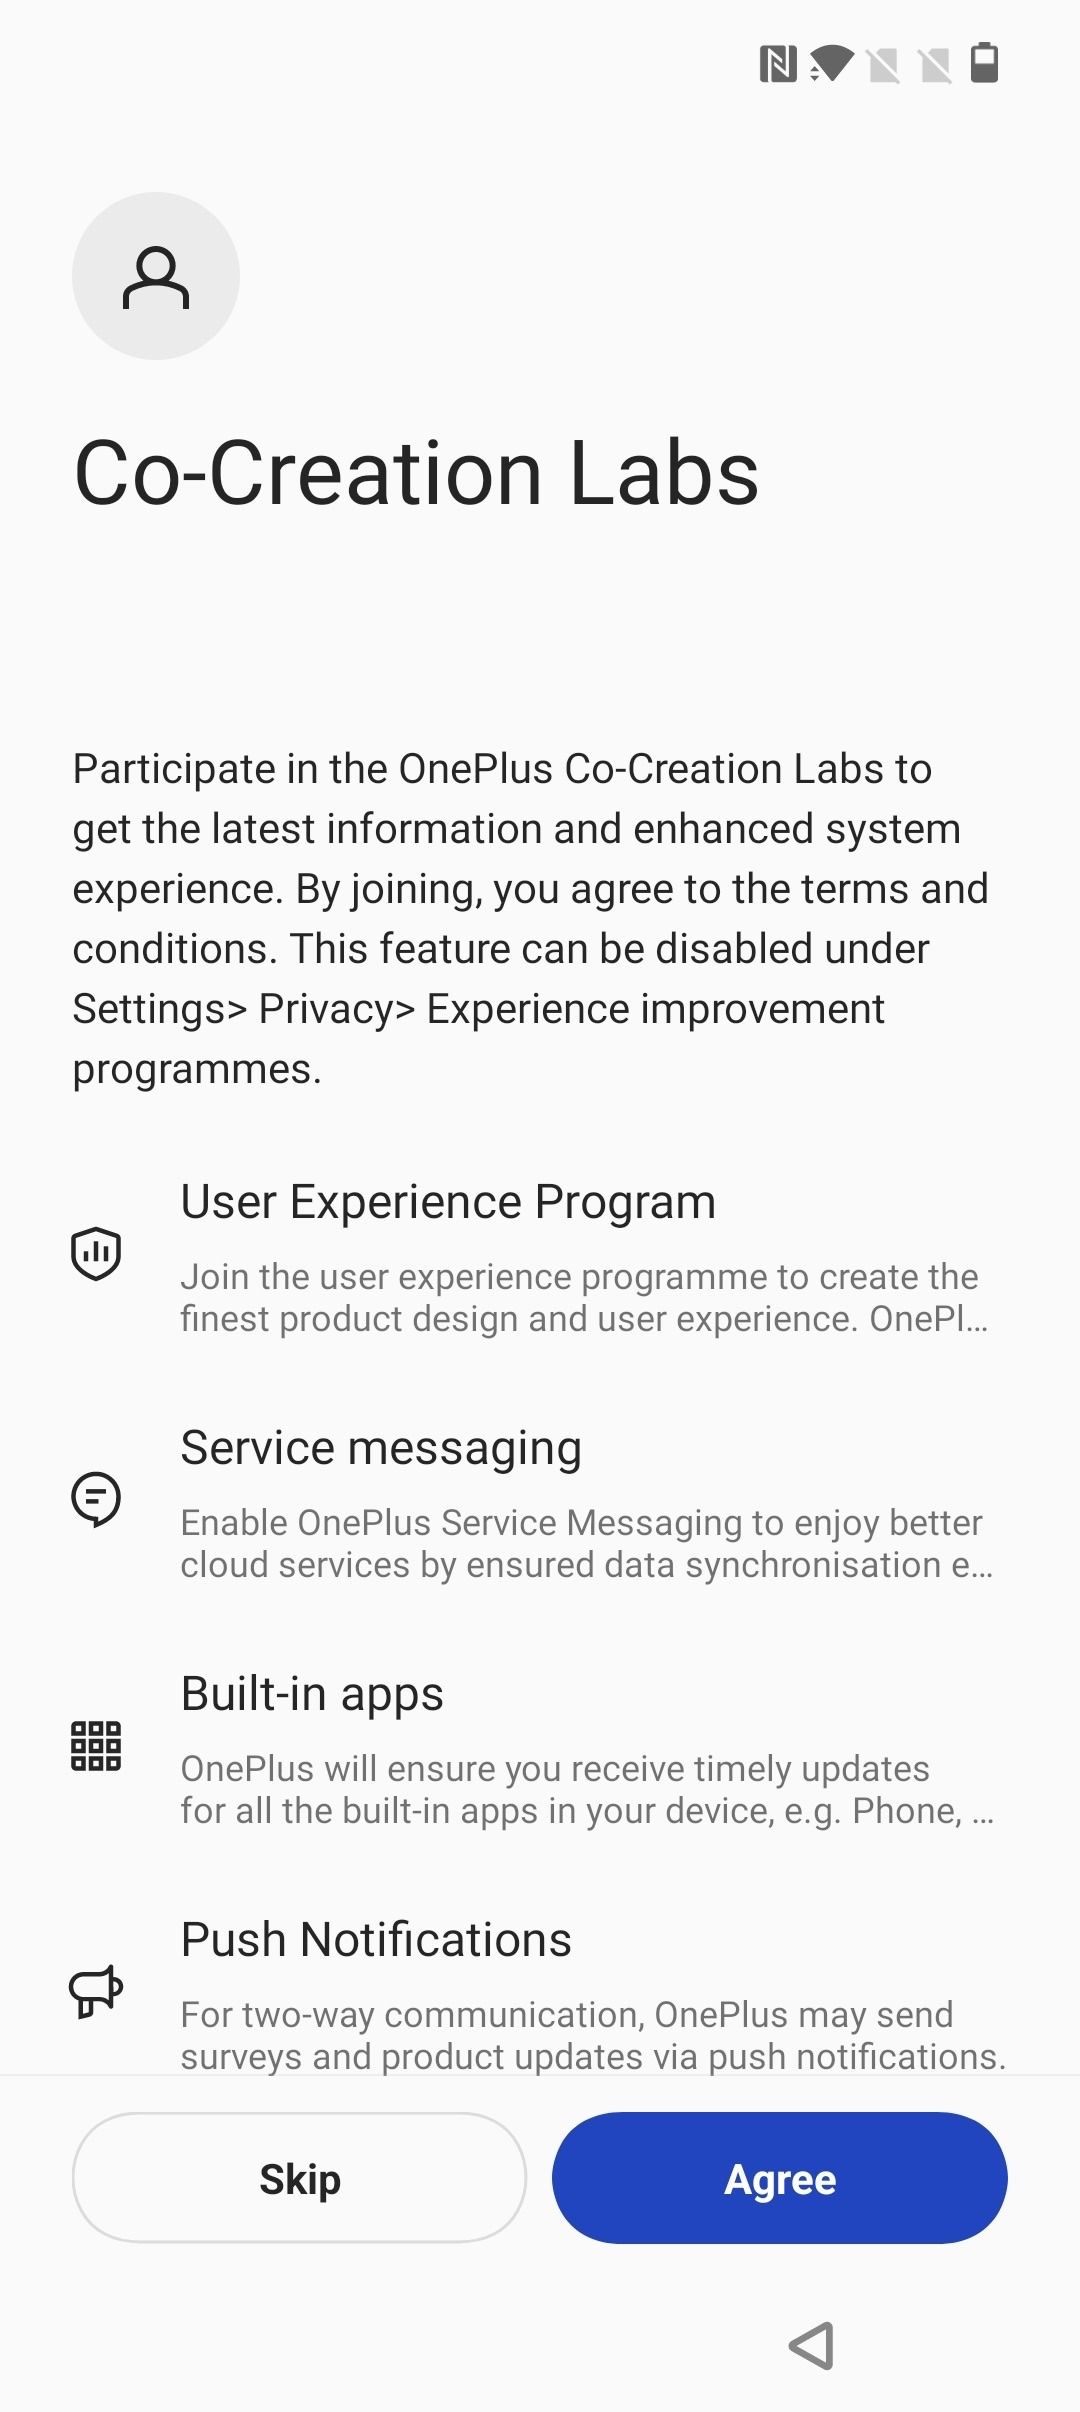 OnePlus: Agreeing to join the Co-creation labs